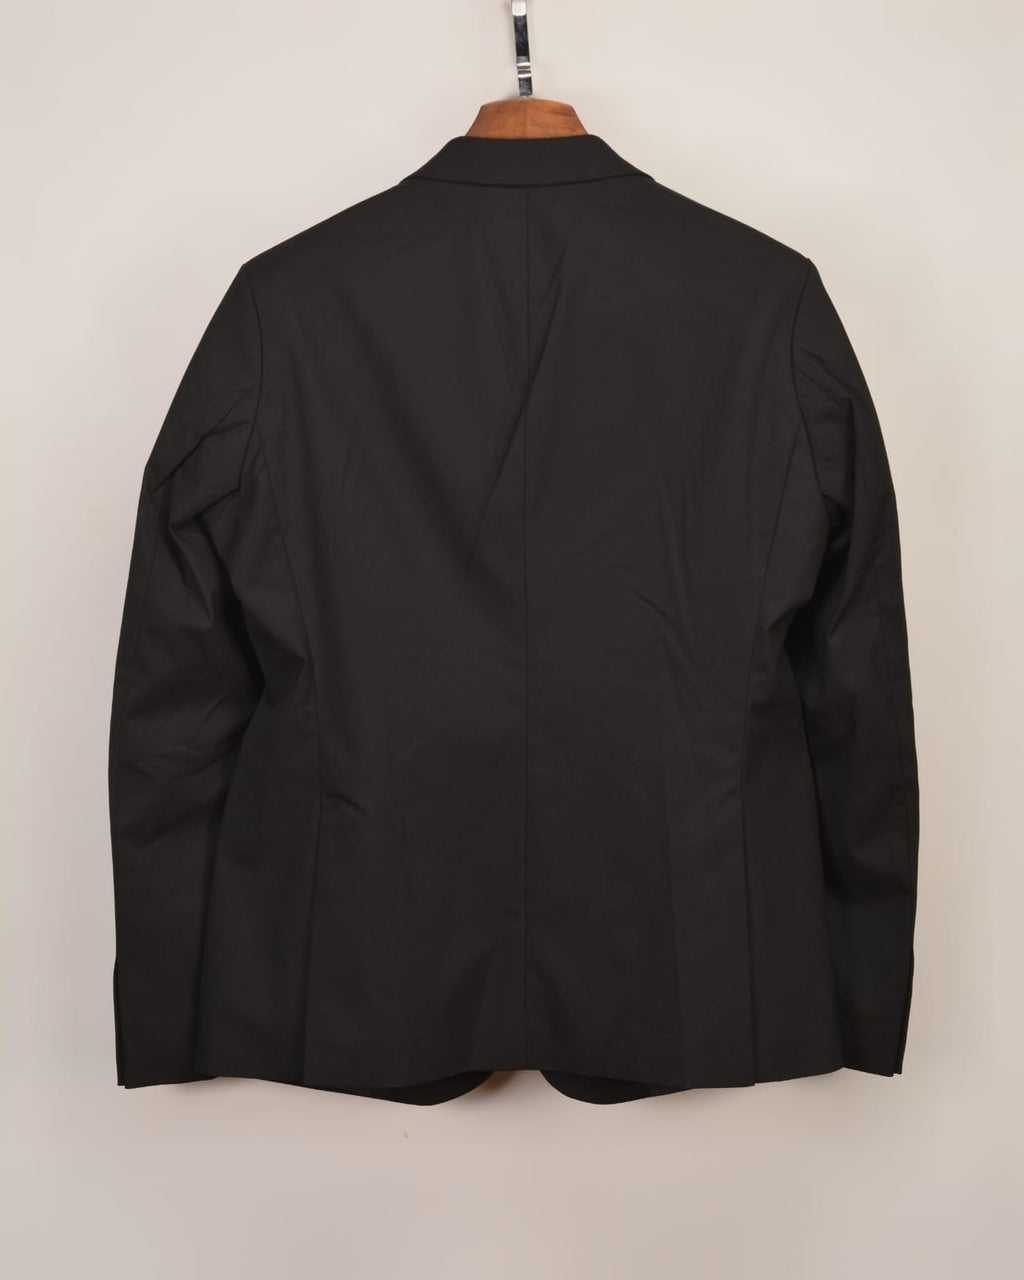 MCNEAL 2-button jacket with breast welt pockets in Black